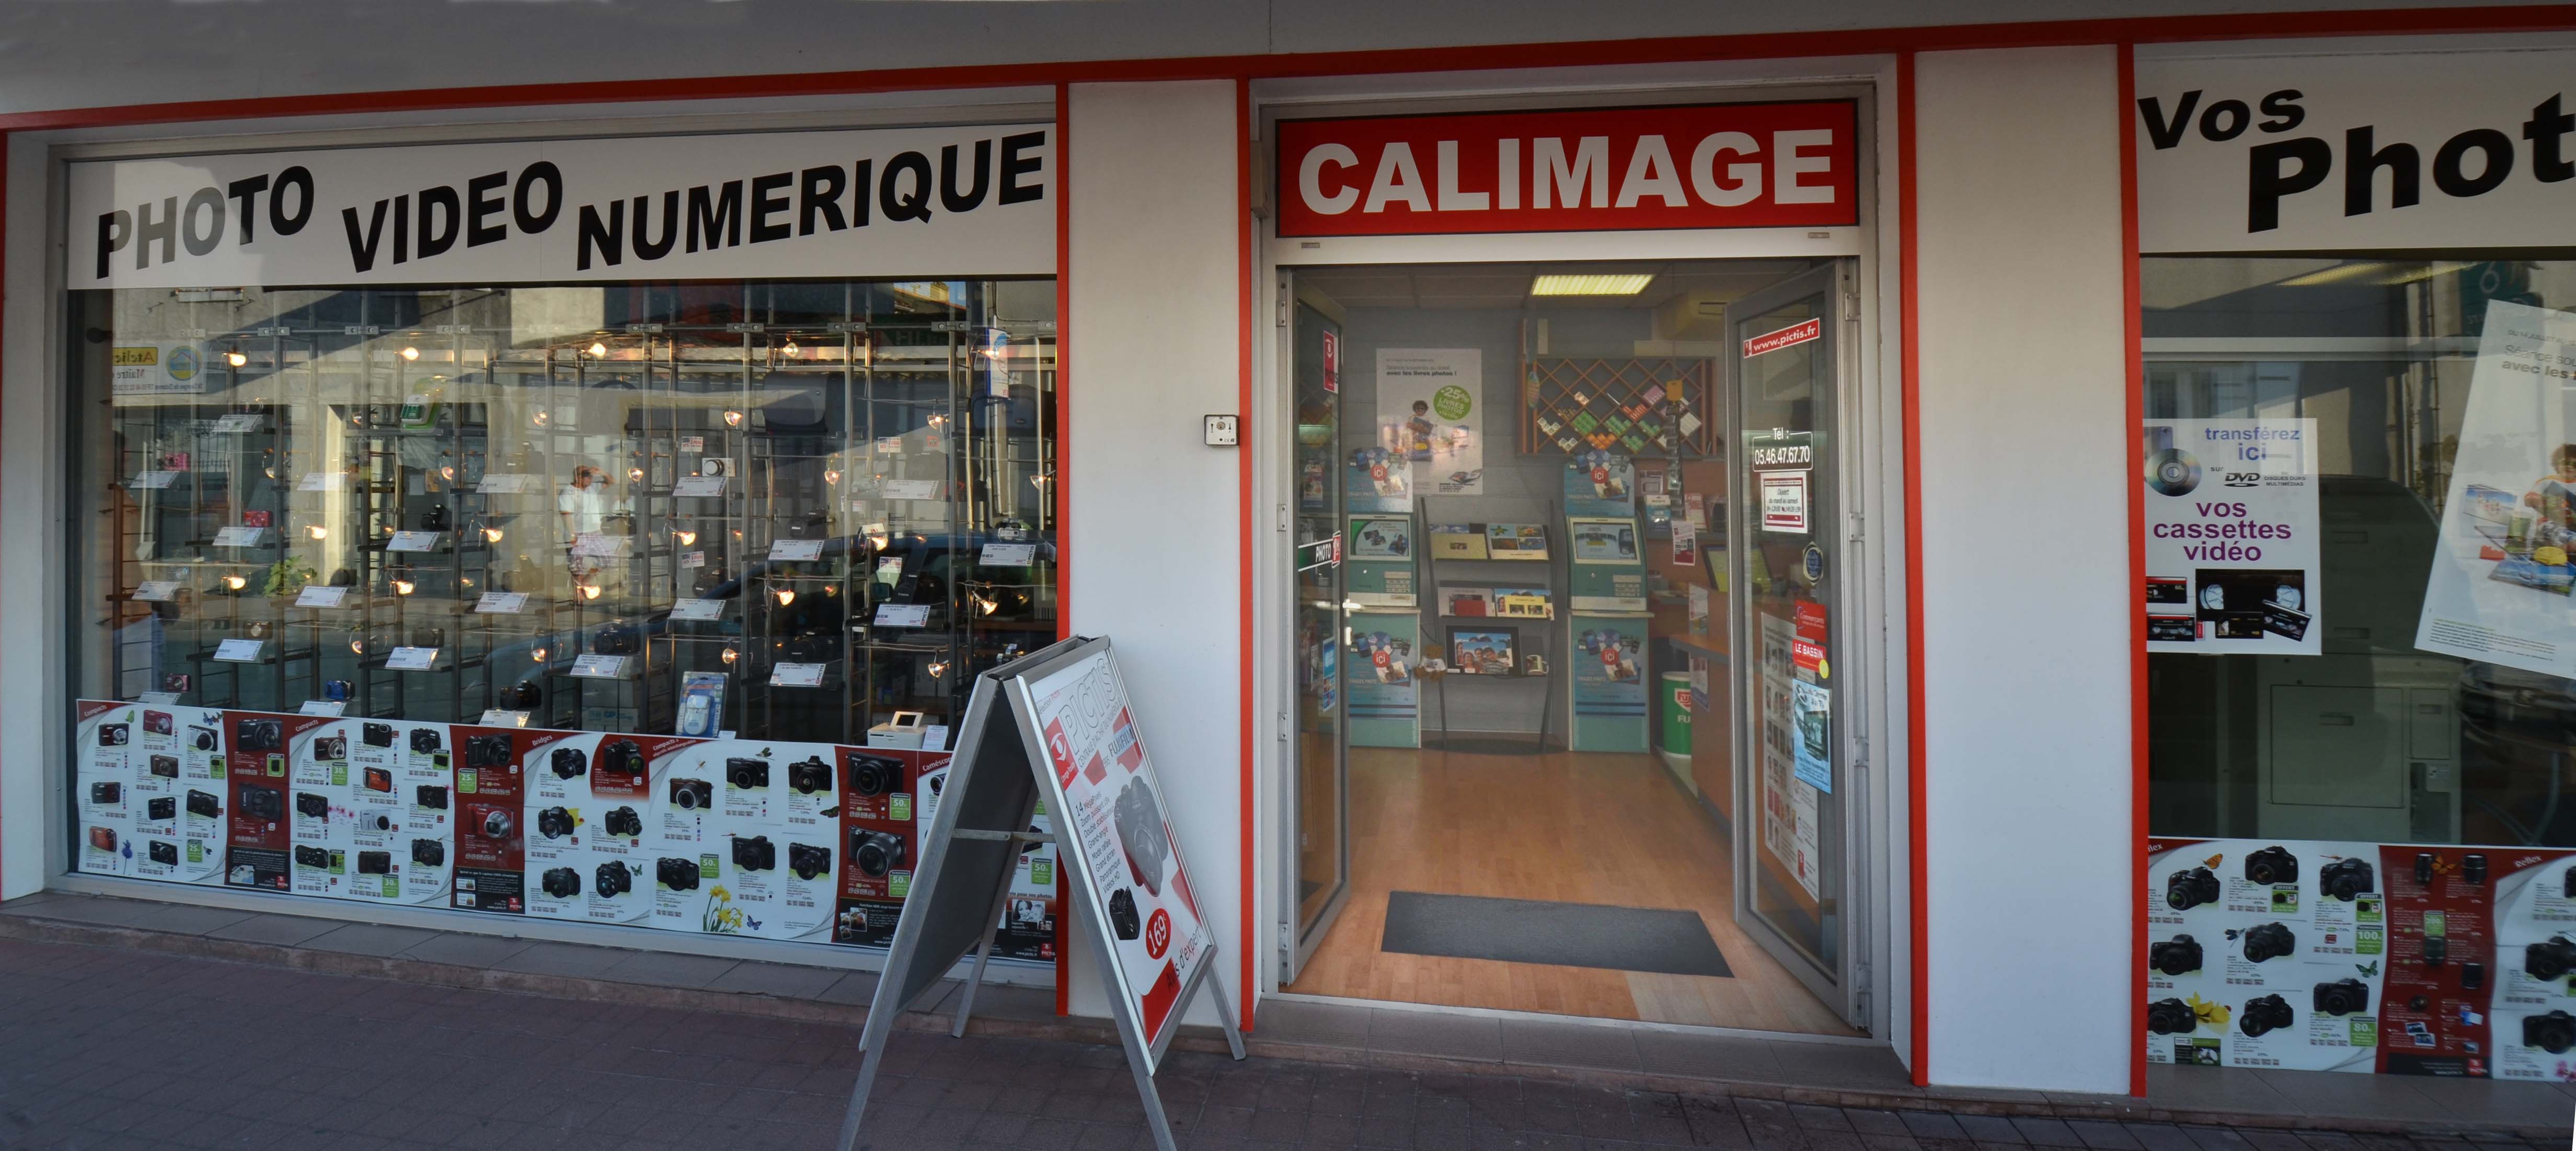 CALIMAGE - Montaxier Patrice